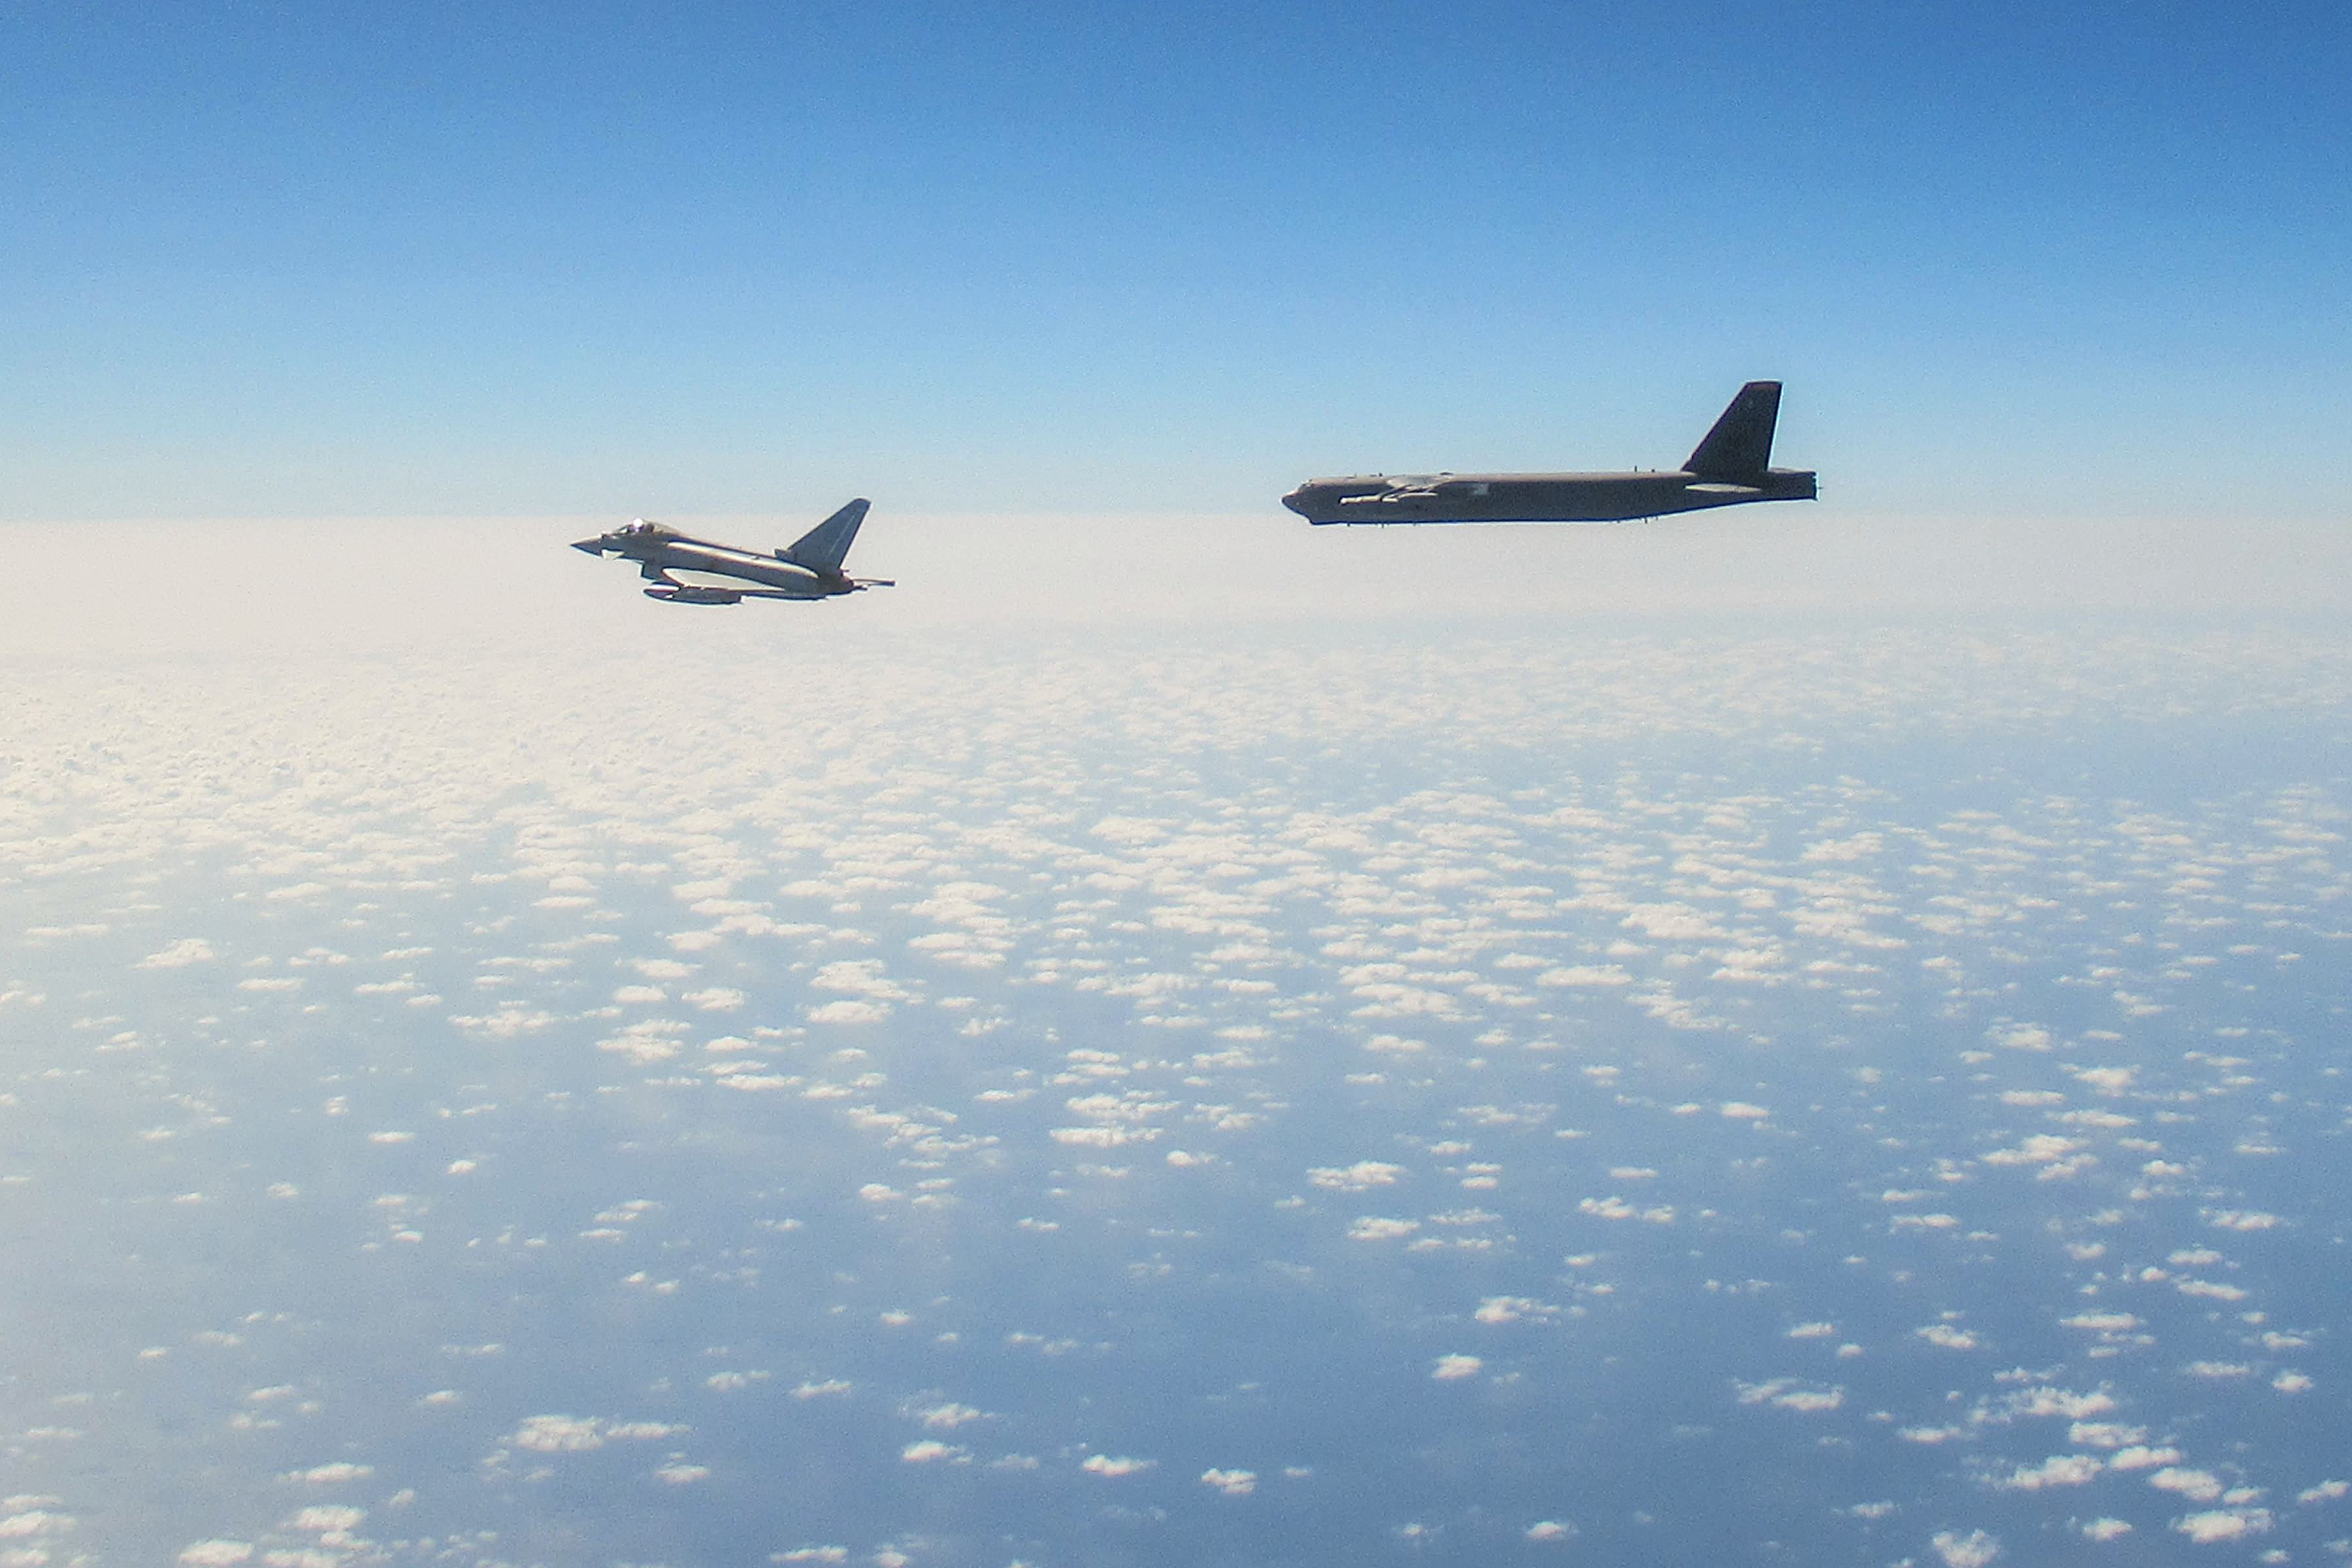 Image shows a RAF Typhoon and B-52 Stratofortresses.